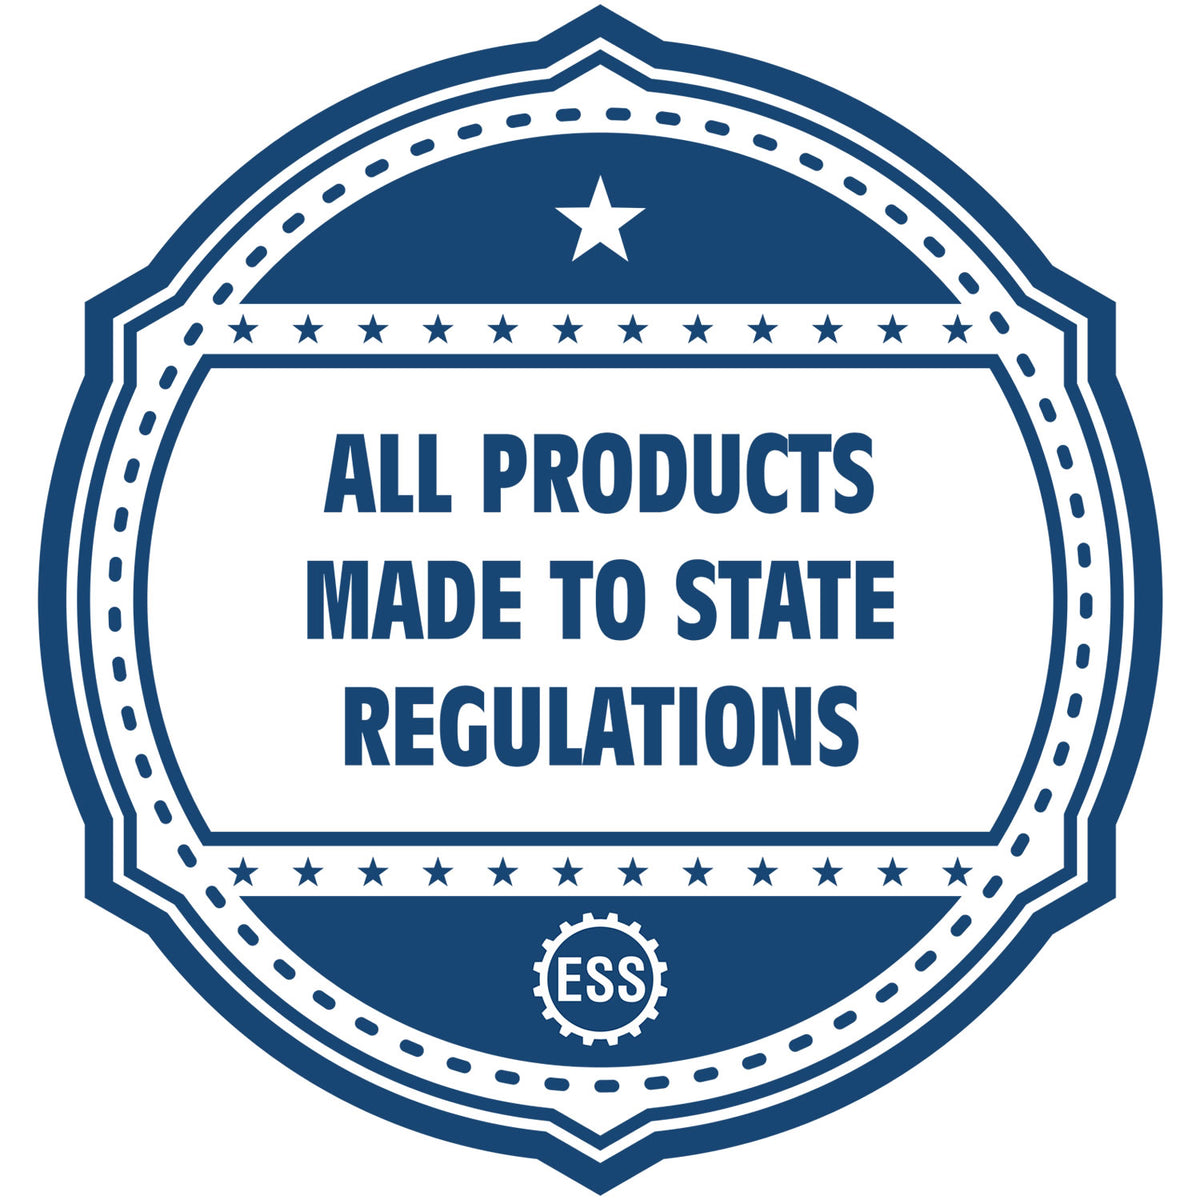 An icon or badge element for the Mississippi Desk Architect Embossing Seal showing that this product is made in compliance with state regulations.